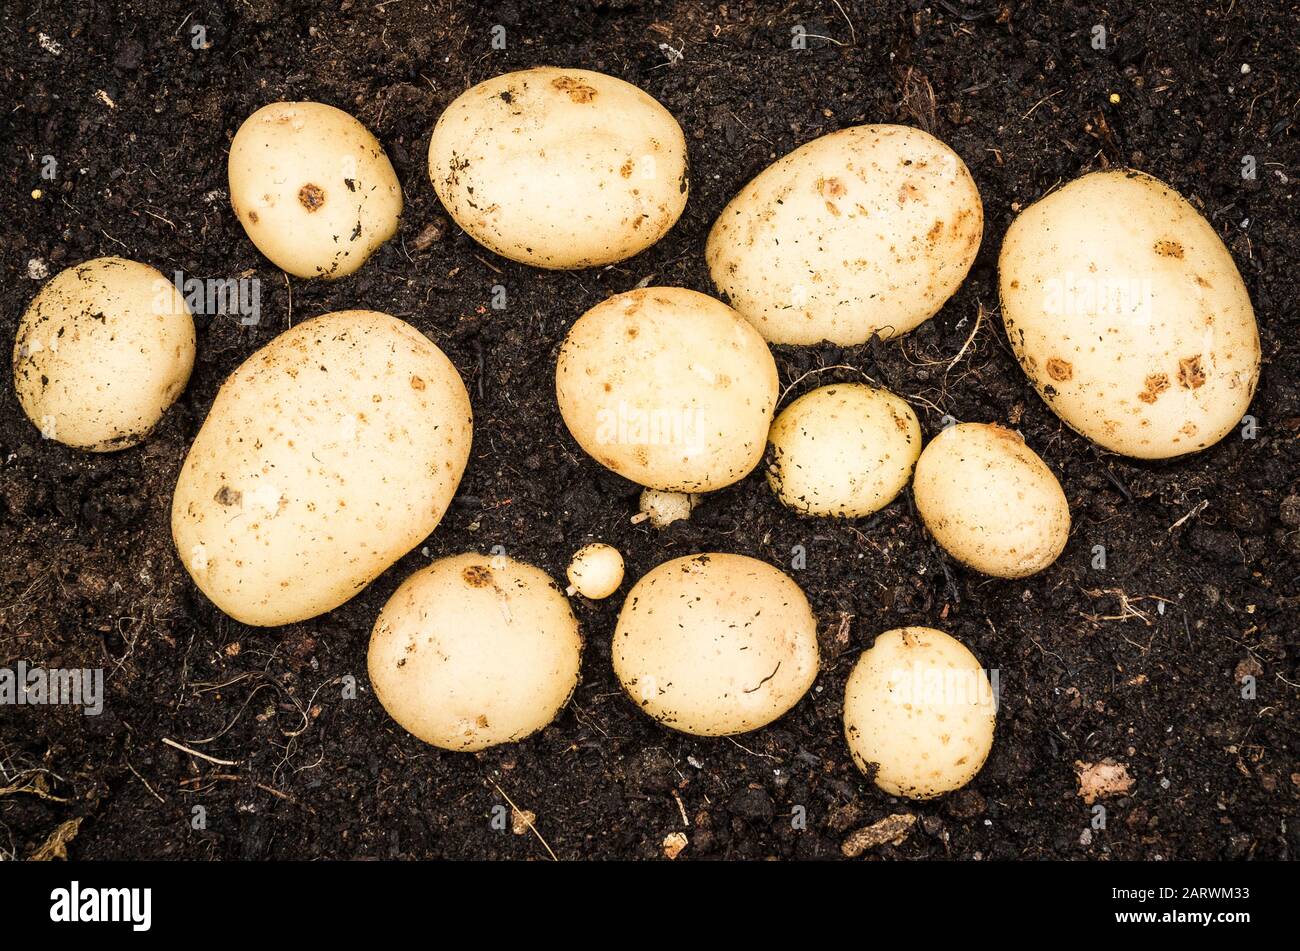 A root of Gemson second early potatoes freshly dug up  for eating in UK Stock Photo